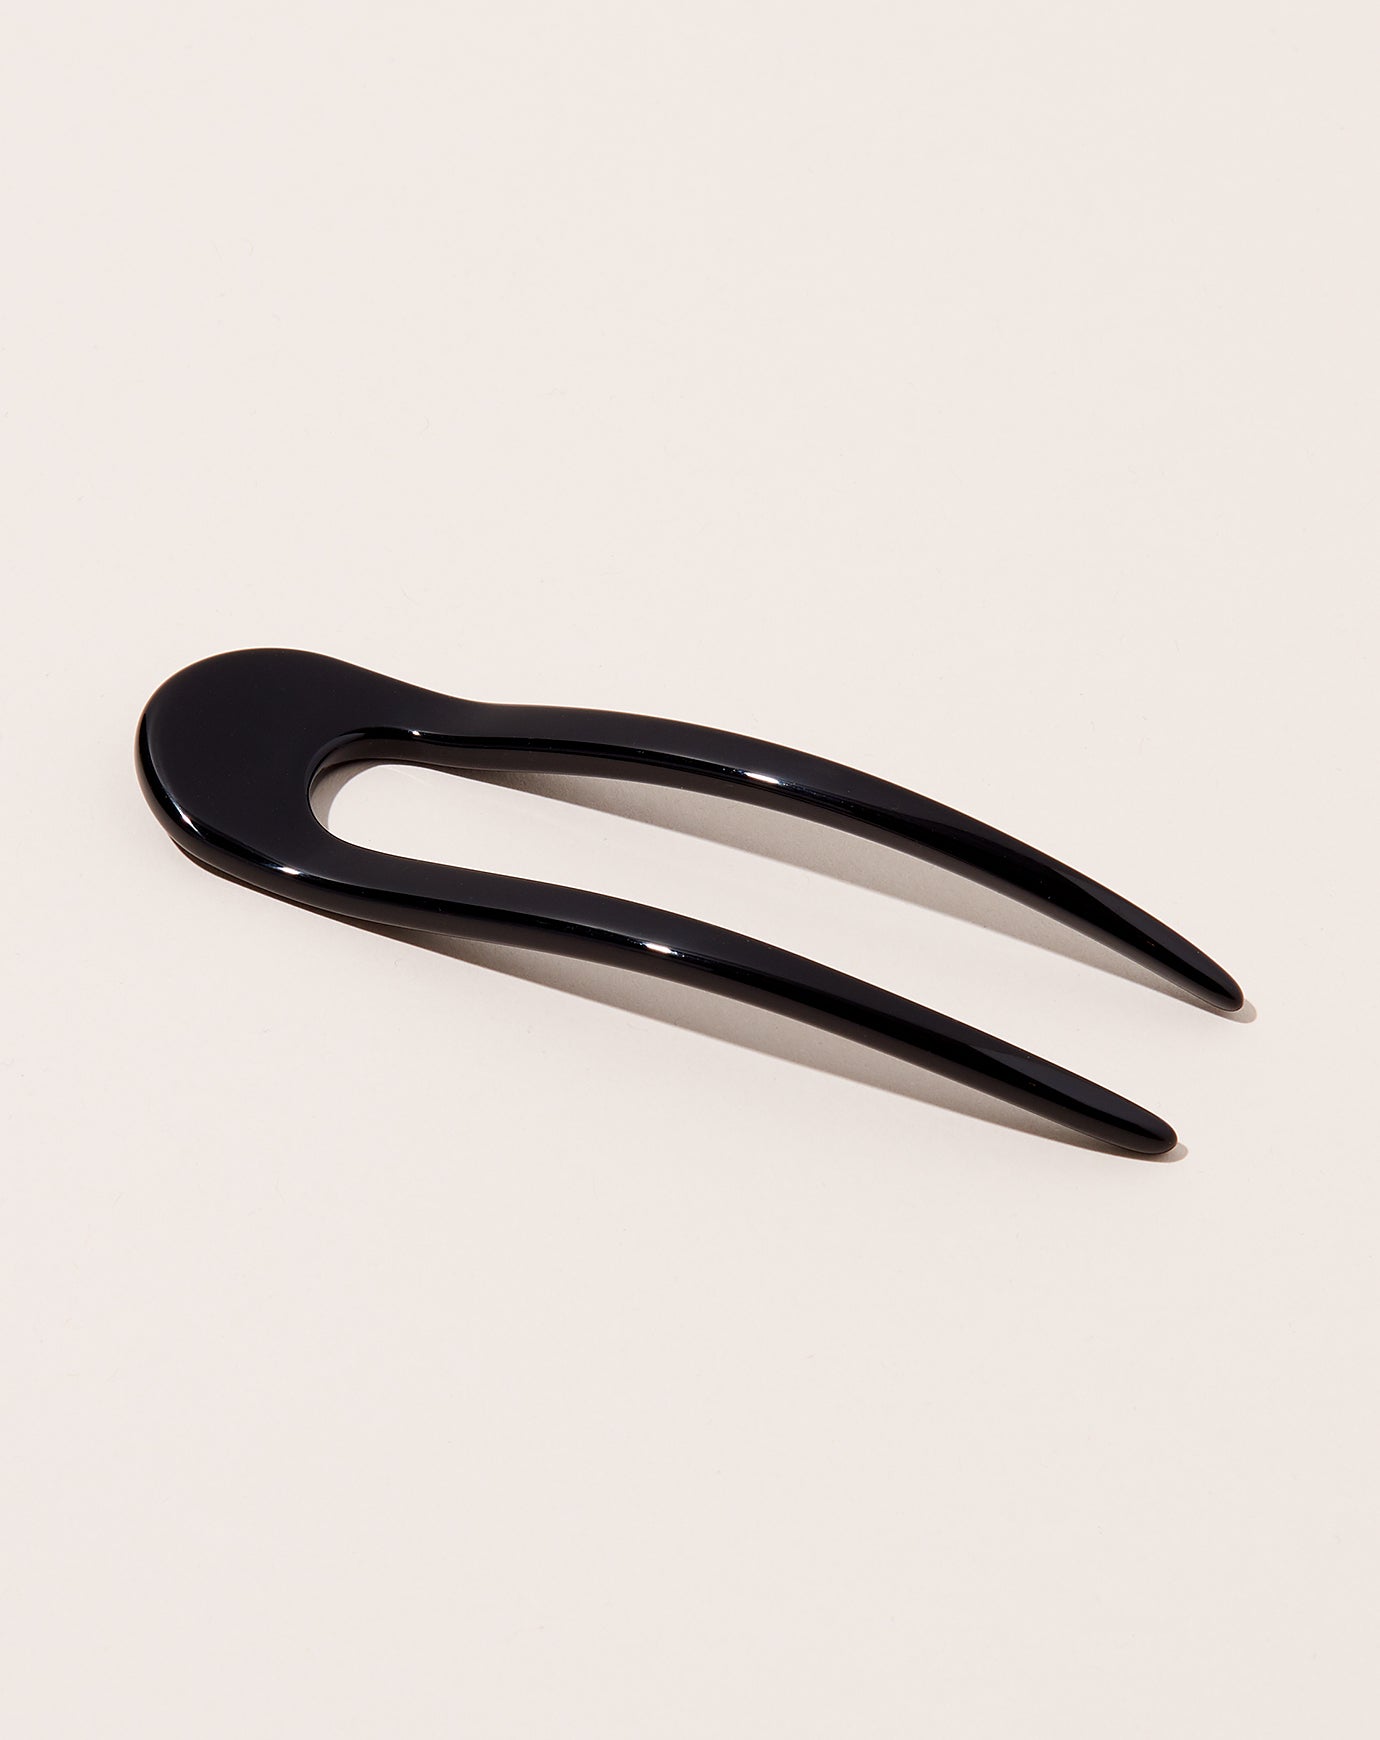 French Pleat Hair Comb | Hair Comb | Tegen Accessories